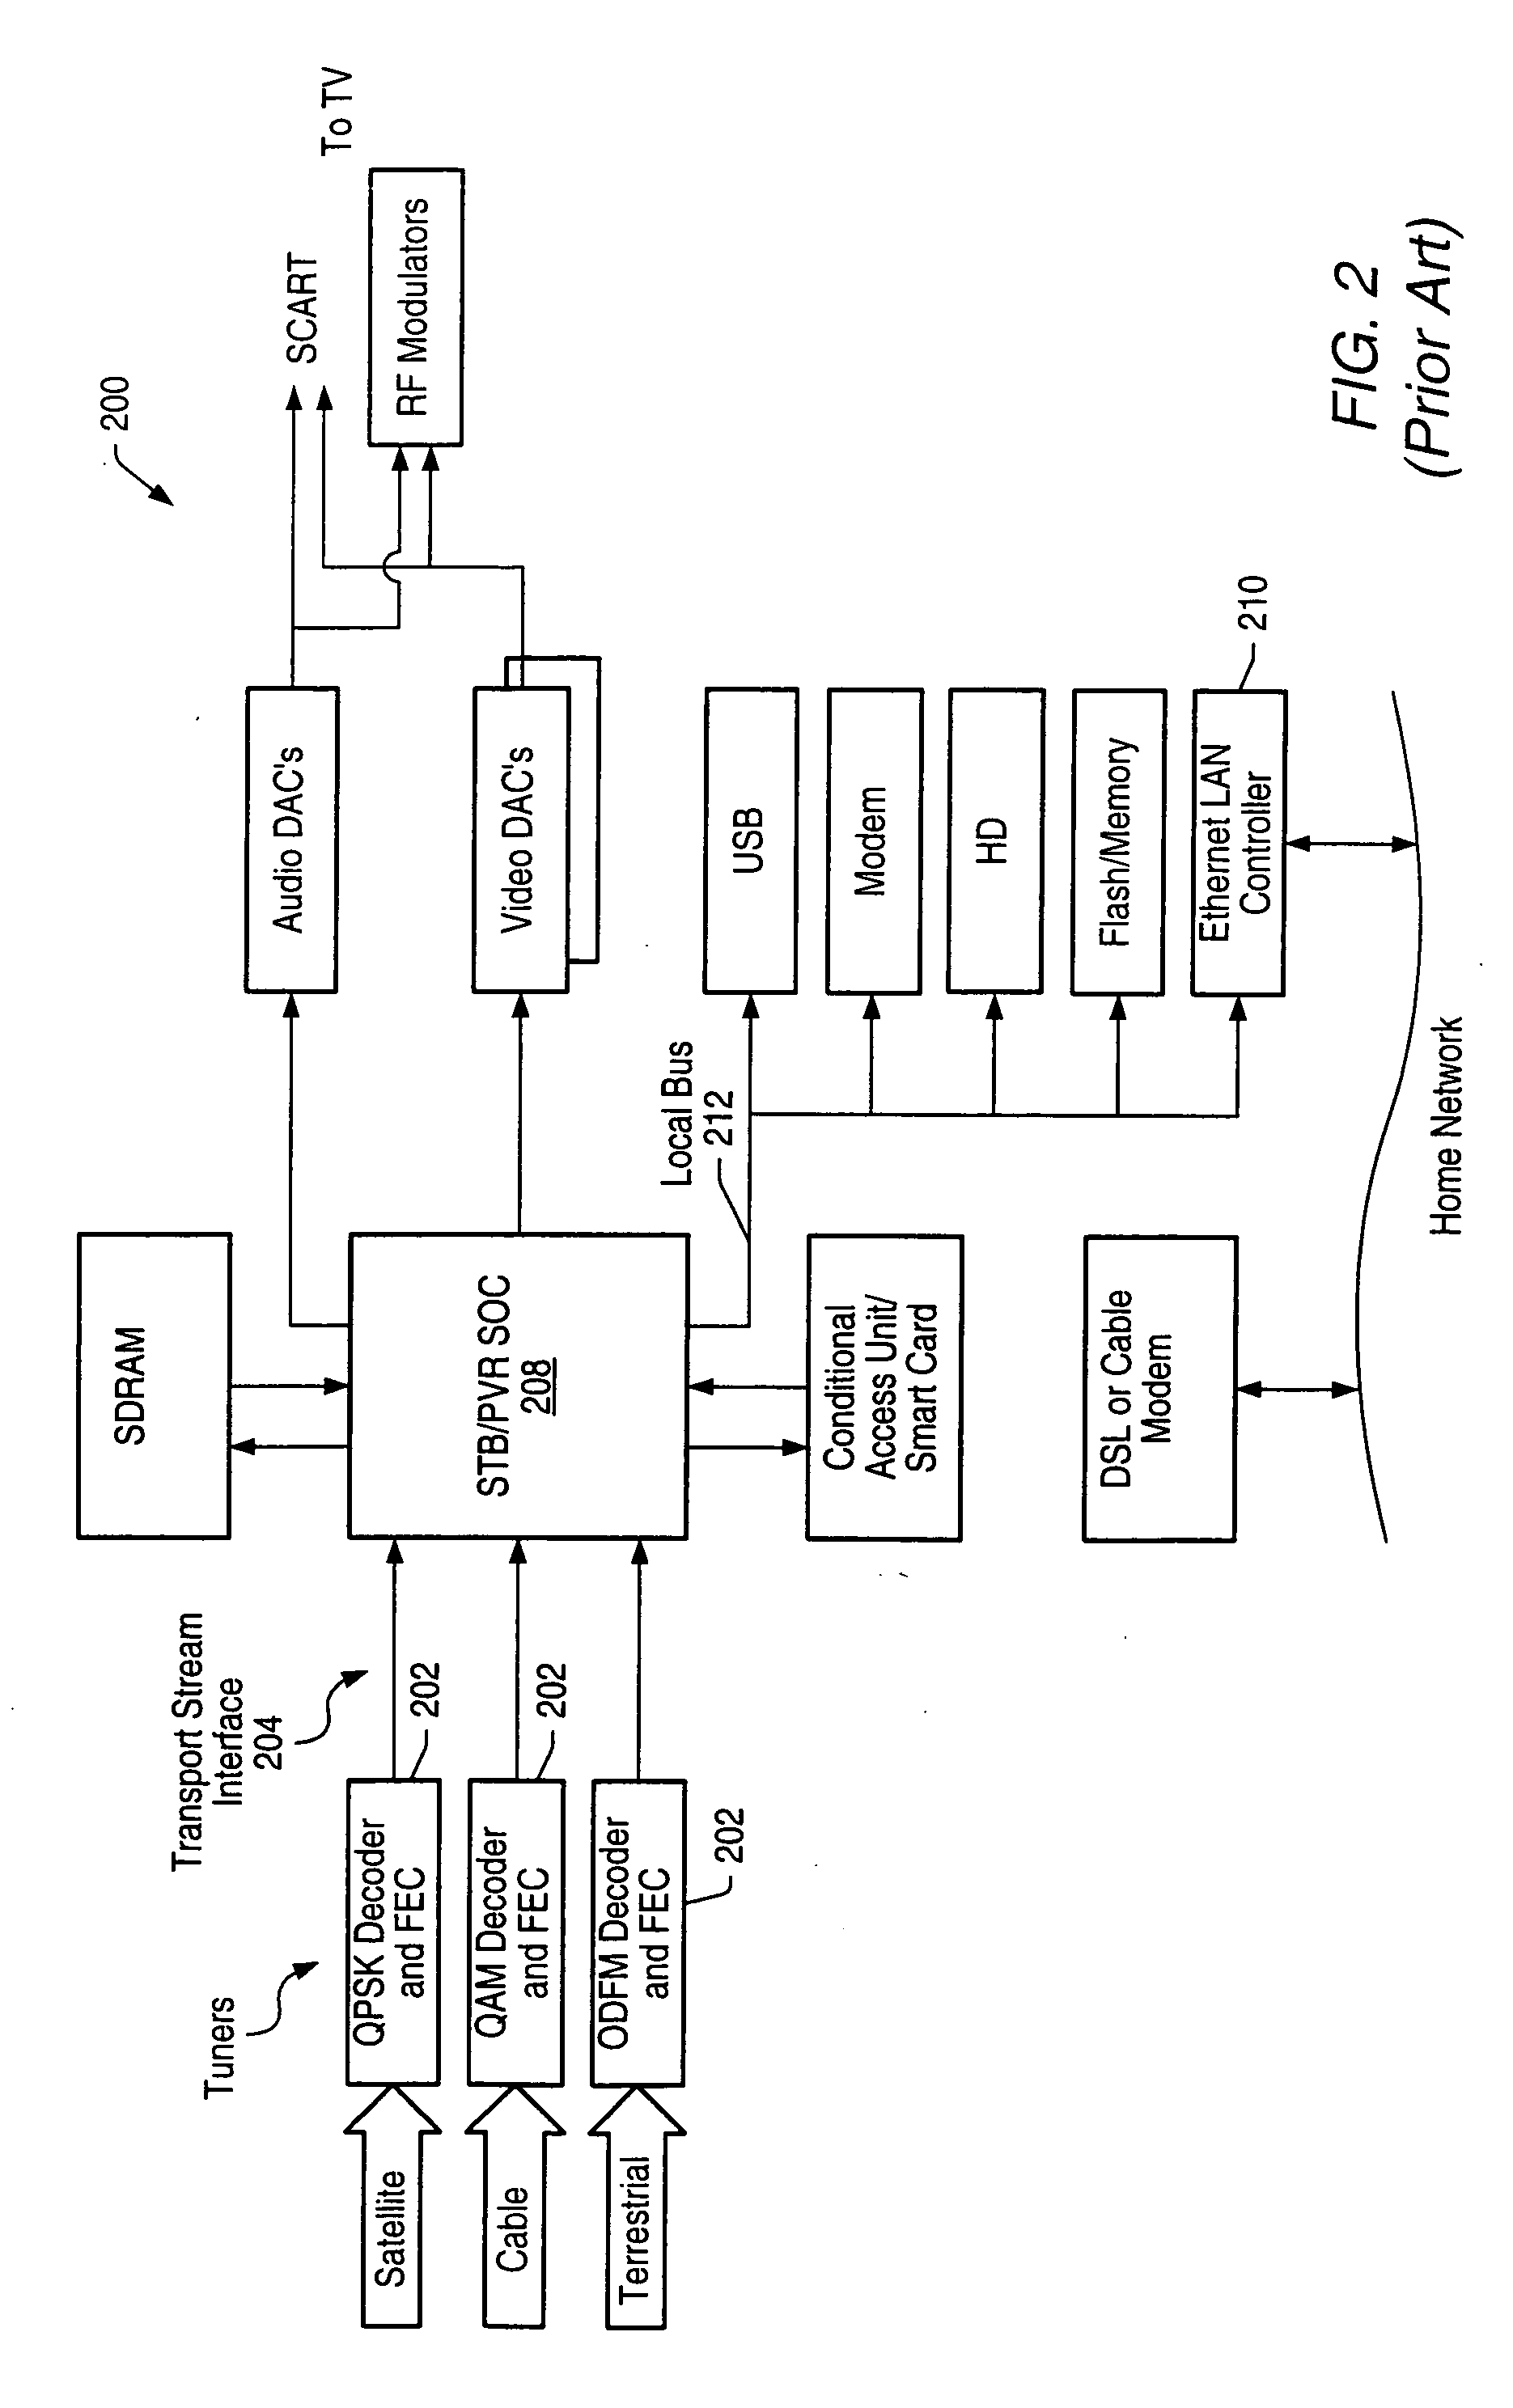 High speed ethernet MAC and PHY apparatus with a filter based ethernet packet router with priority queuing and single or multiple transport stream interfaces